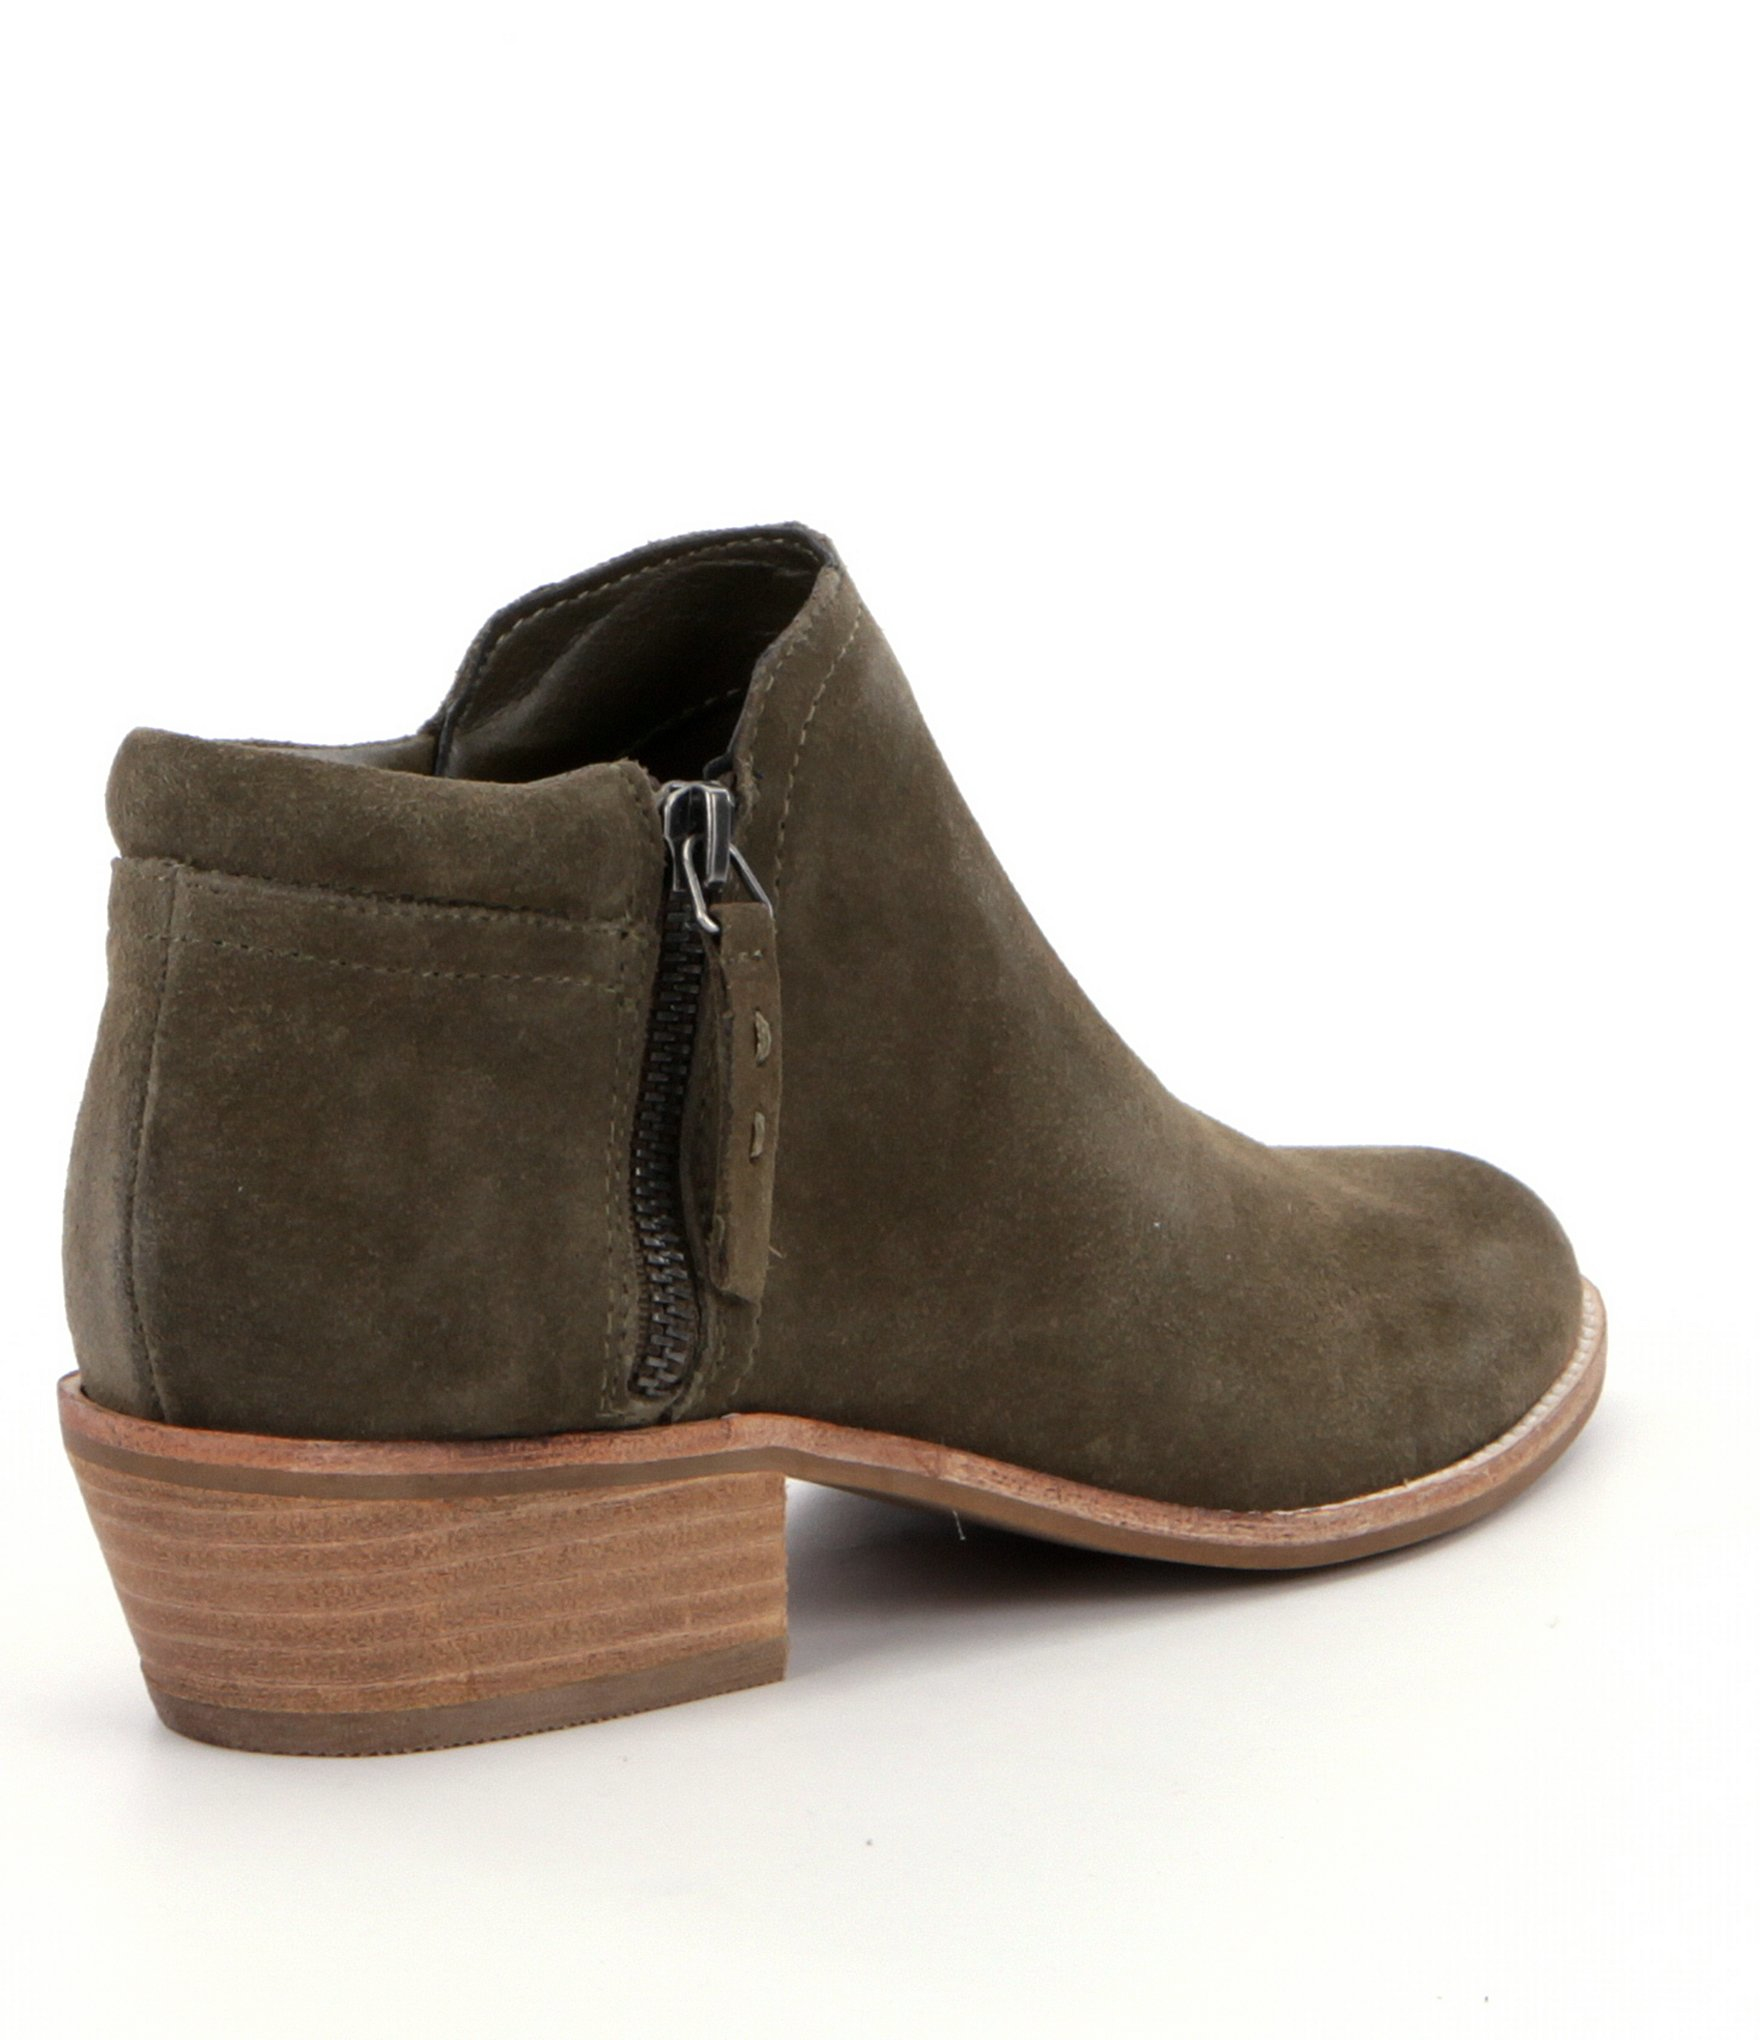 Steve Madden Tobii Booties in Green - Lyst